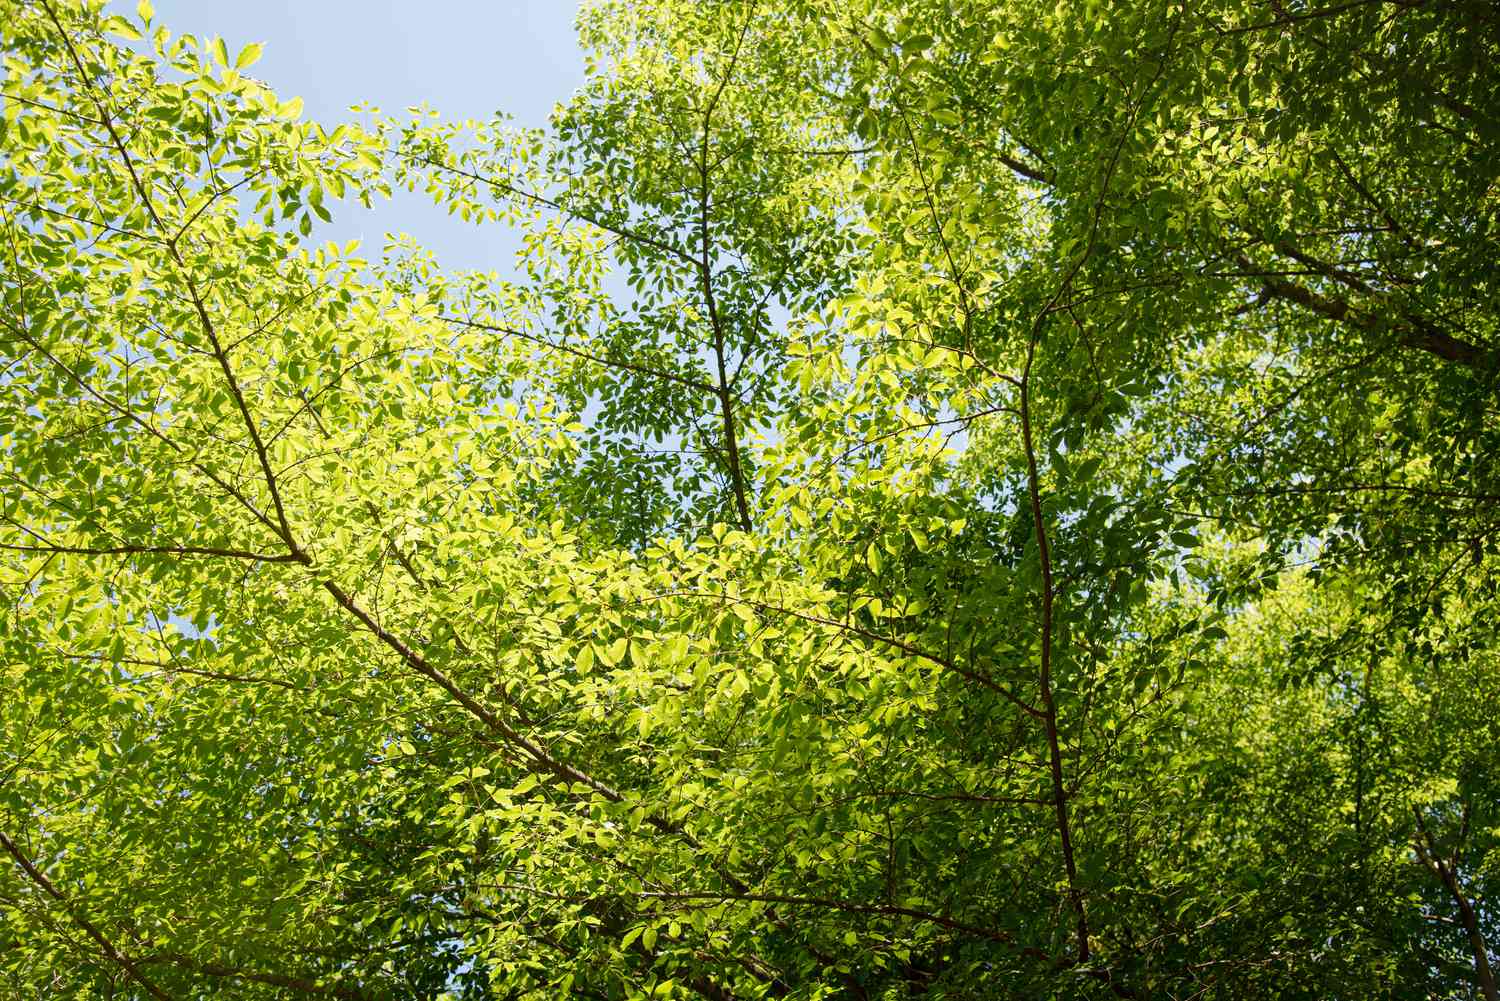 Vine leaf maple branches with bright green trifoliate leaves in sunlight